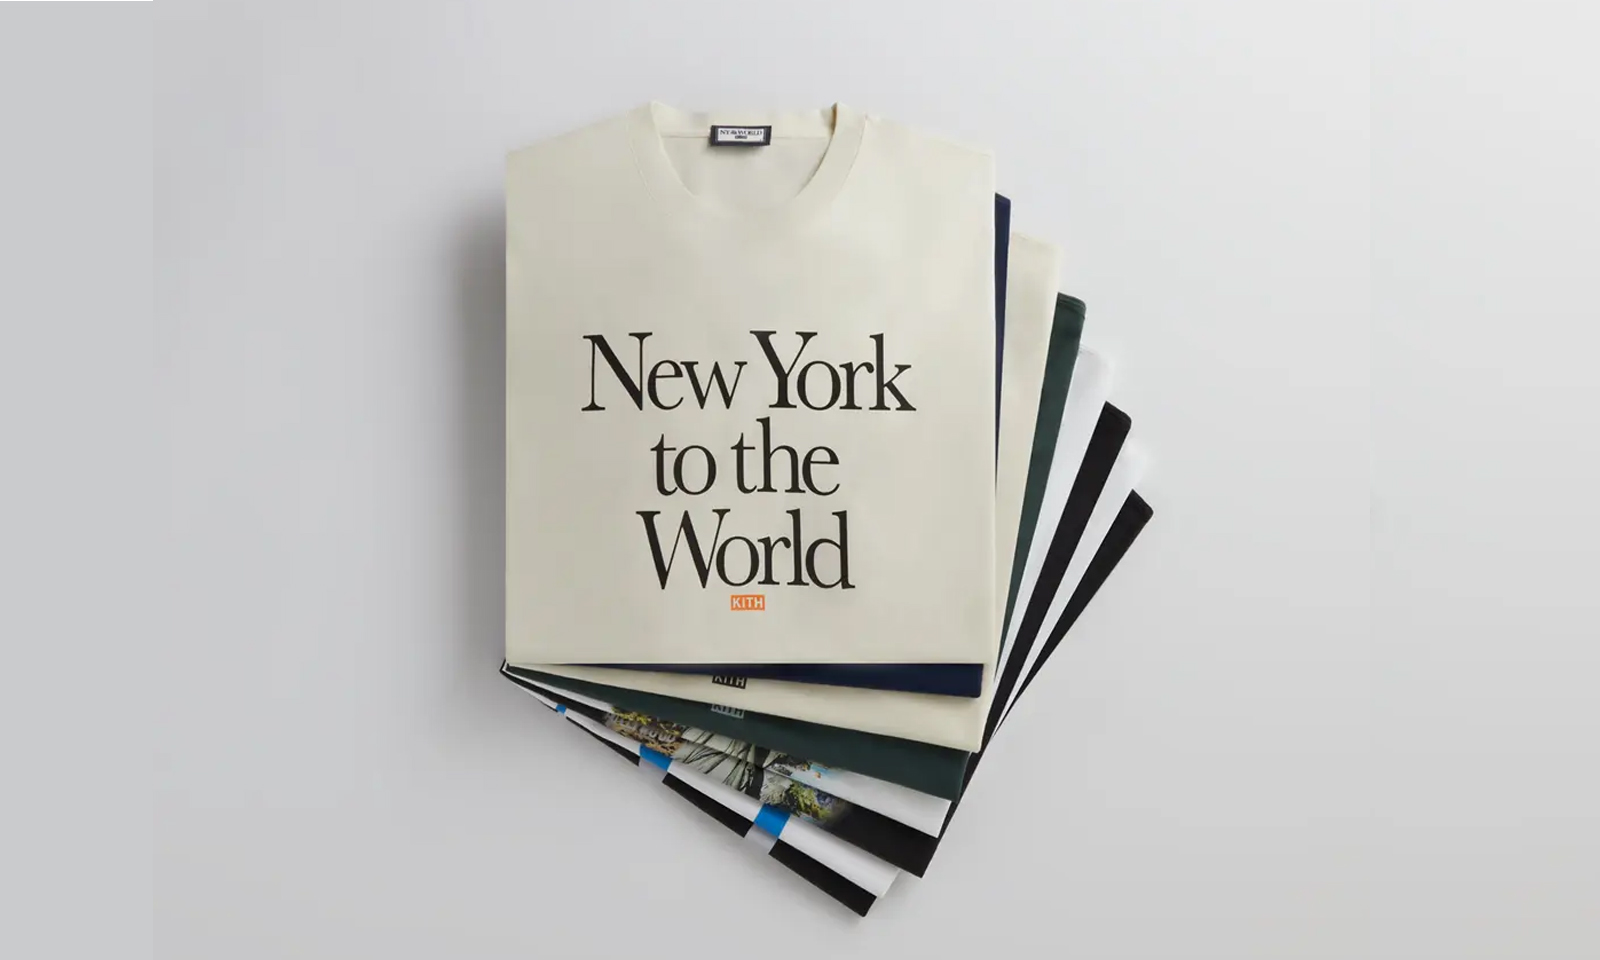 KITH New York to the World™ 胶囊系列发布